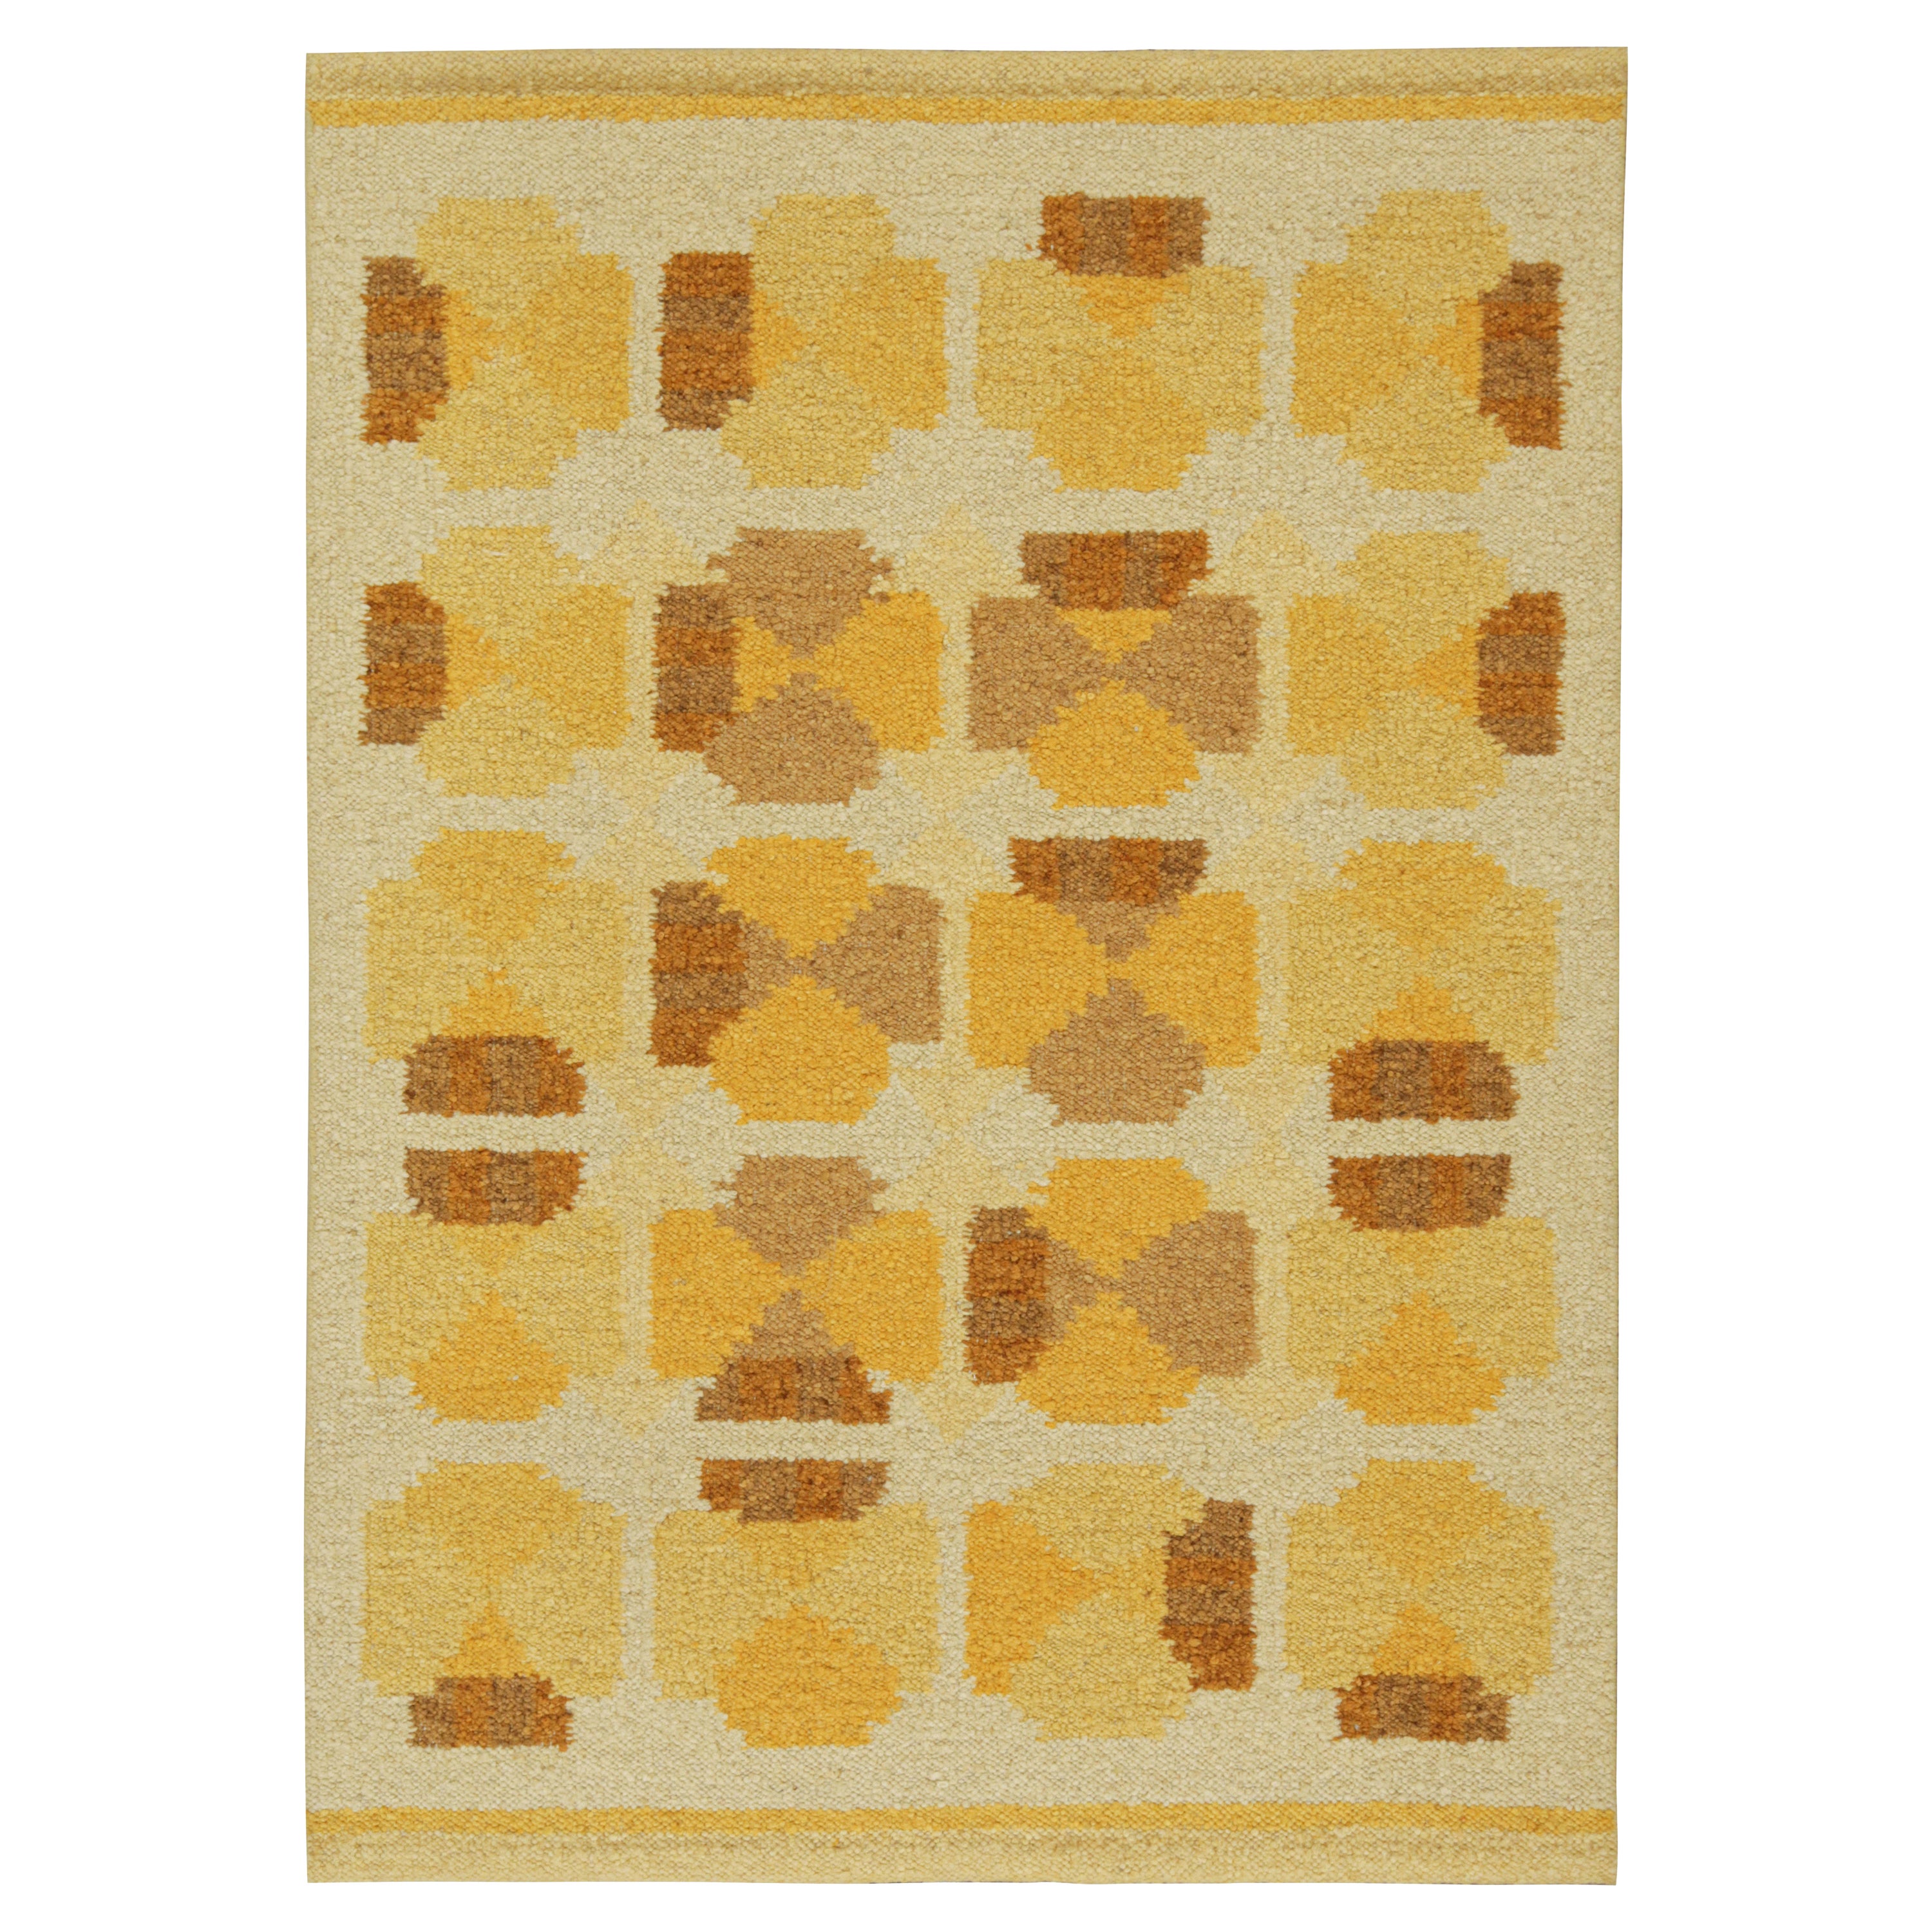 Rug & Kilim’s Scandinavian Style Kilim with Gold-Brown Geometric Patterns For Sale